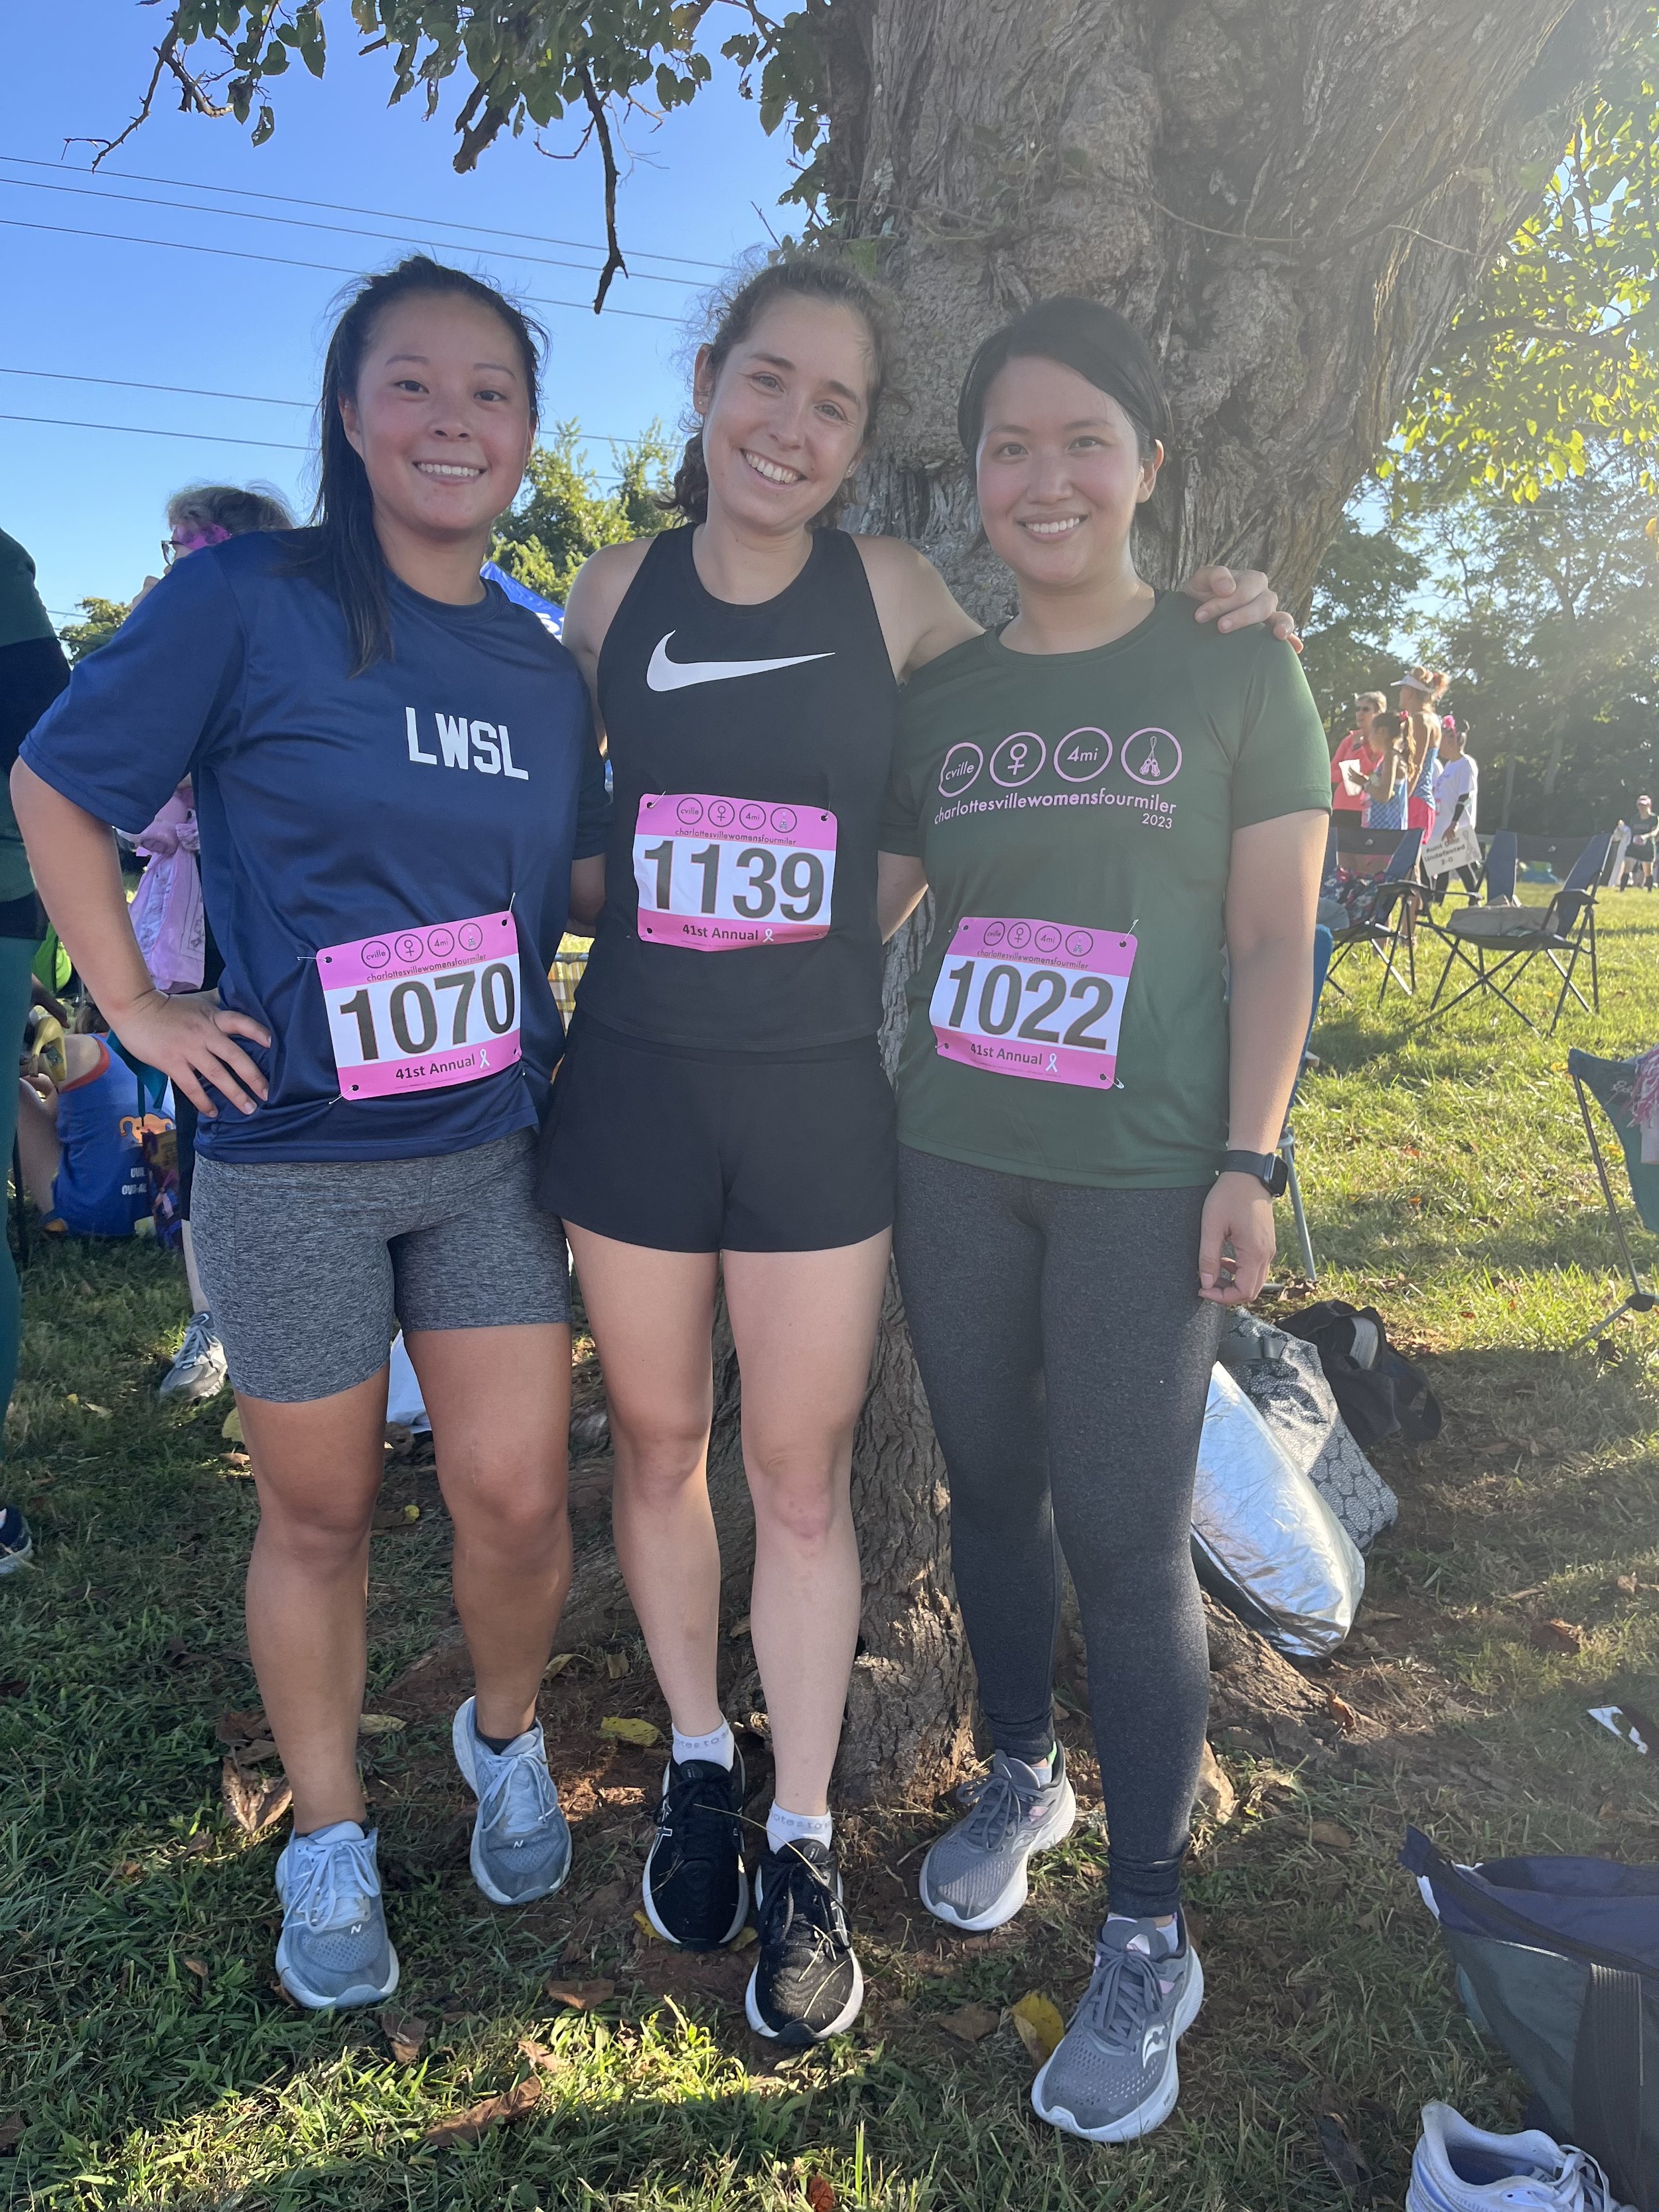 Addie, Kristine, and Jess at the 4 miler